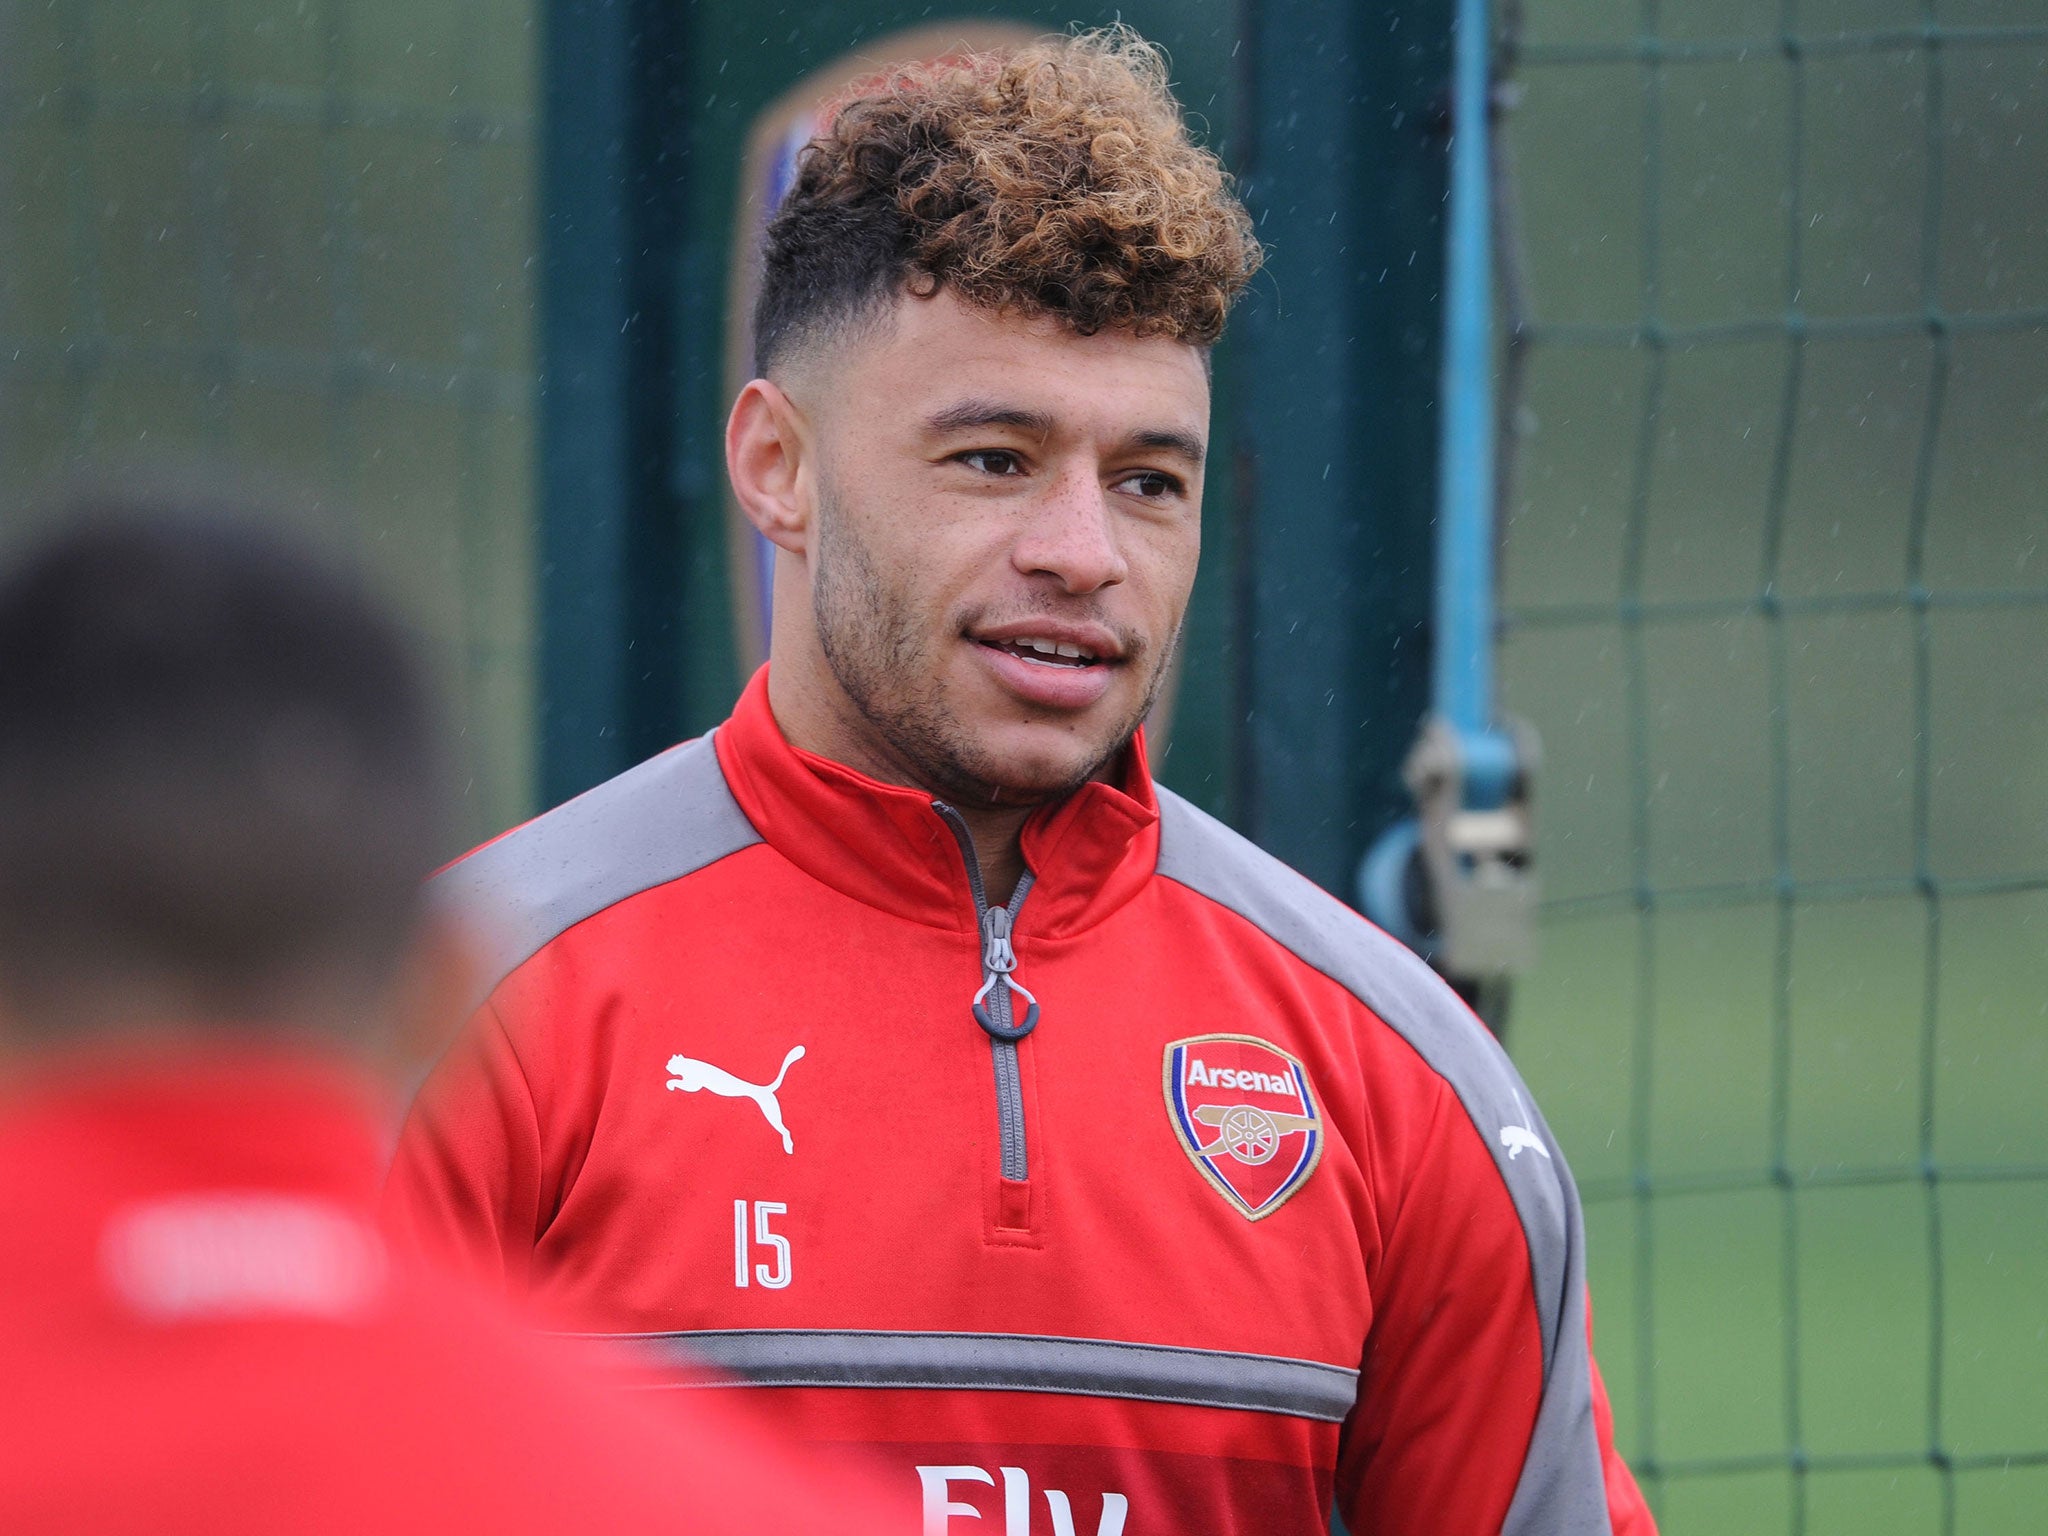 Wenger is adamant Oxlade-Chamberlain is integral to his plans as well